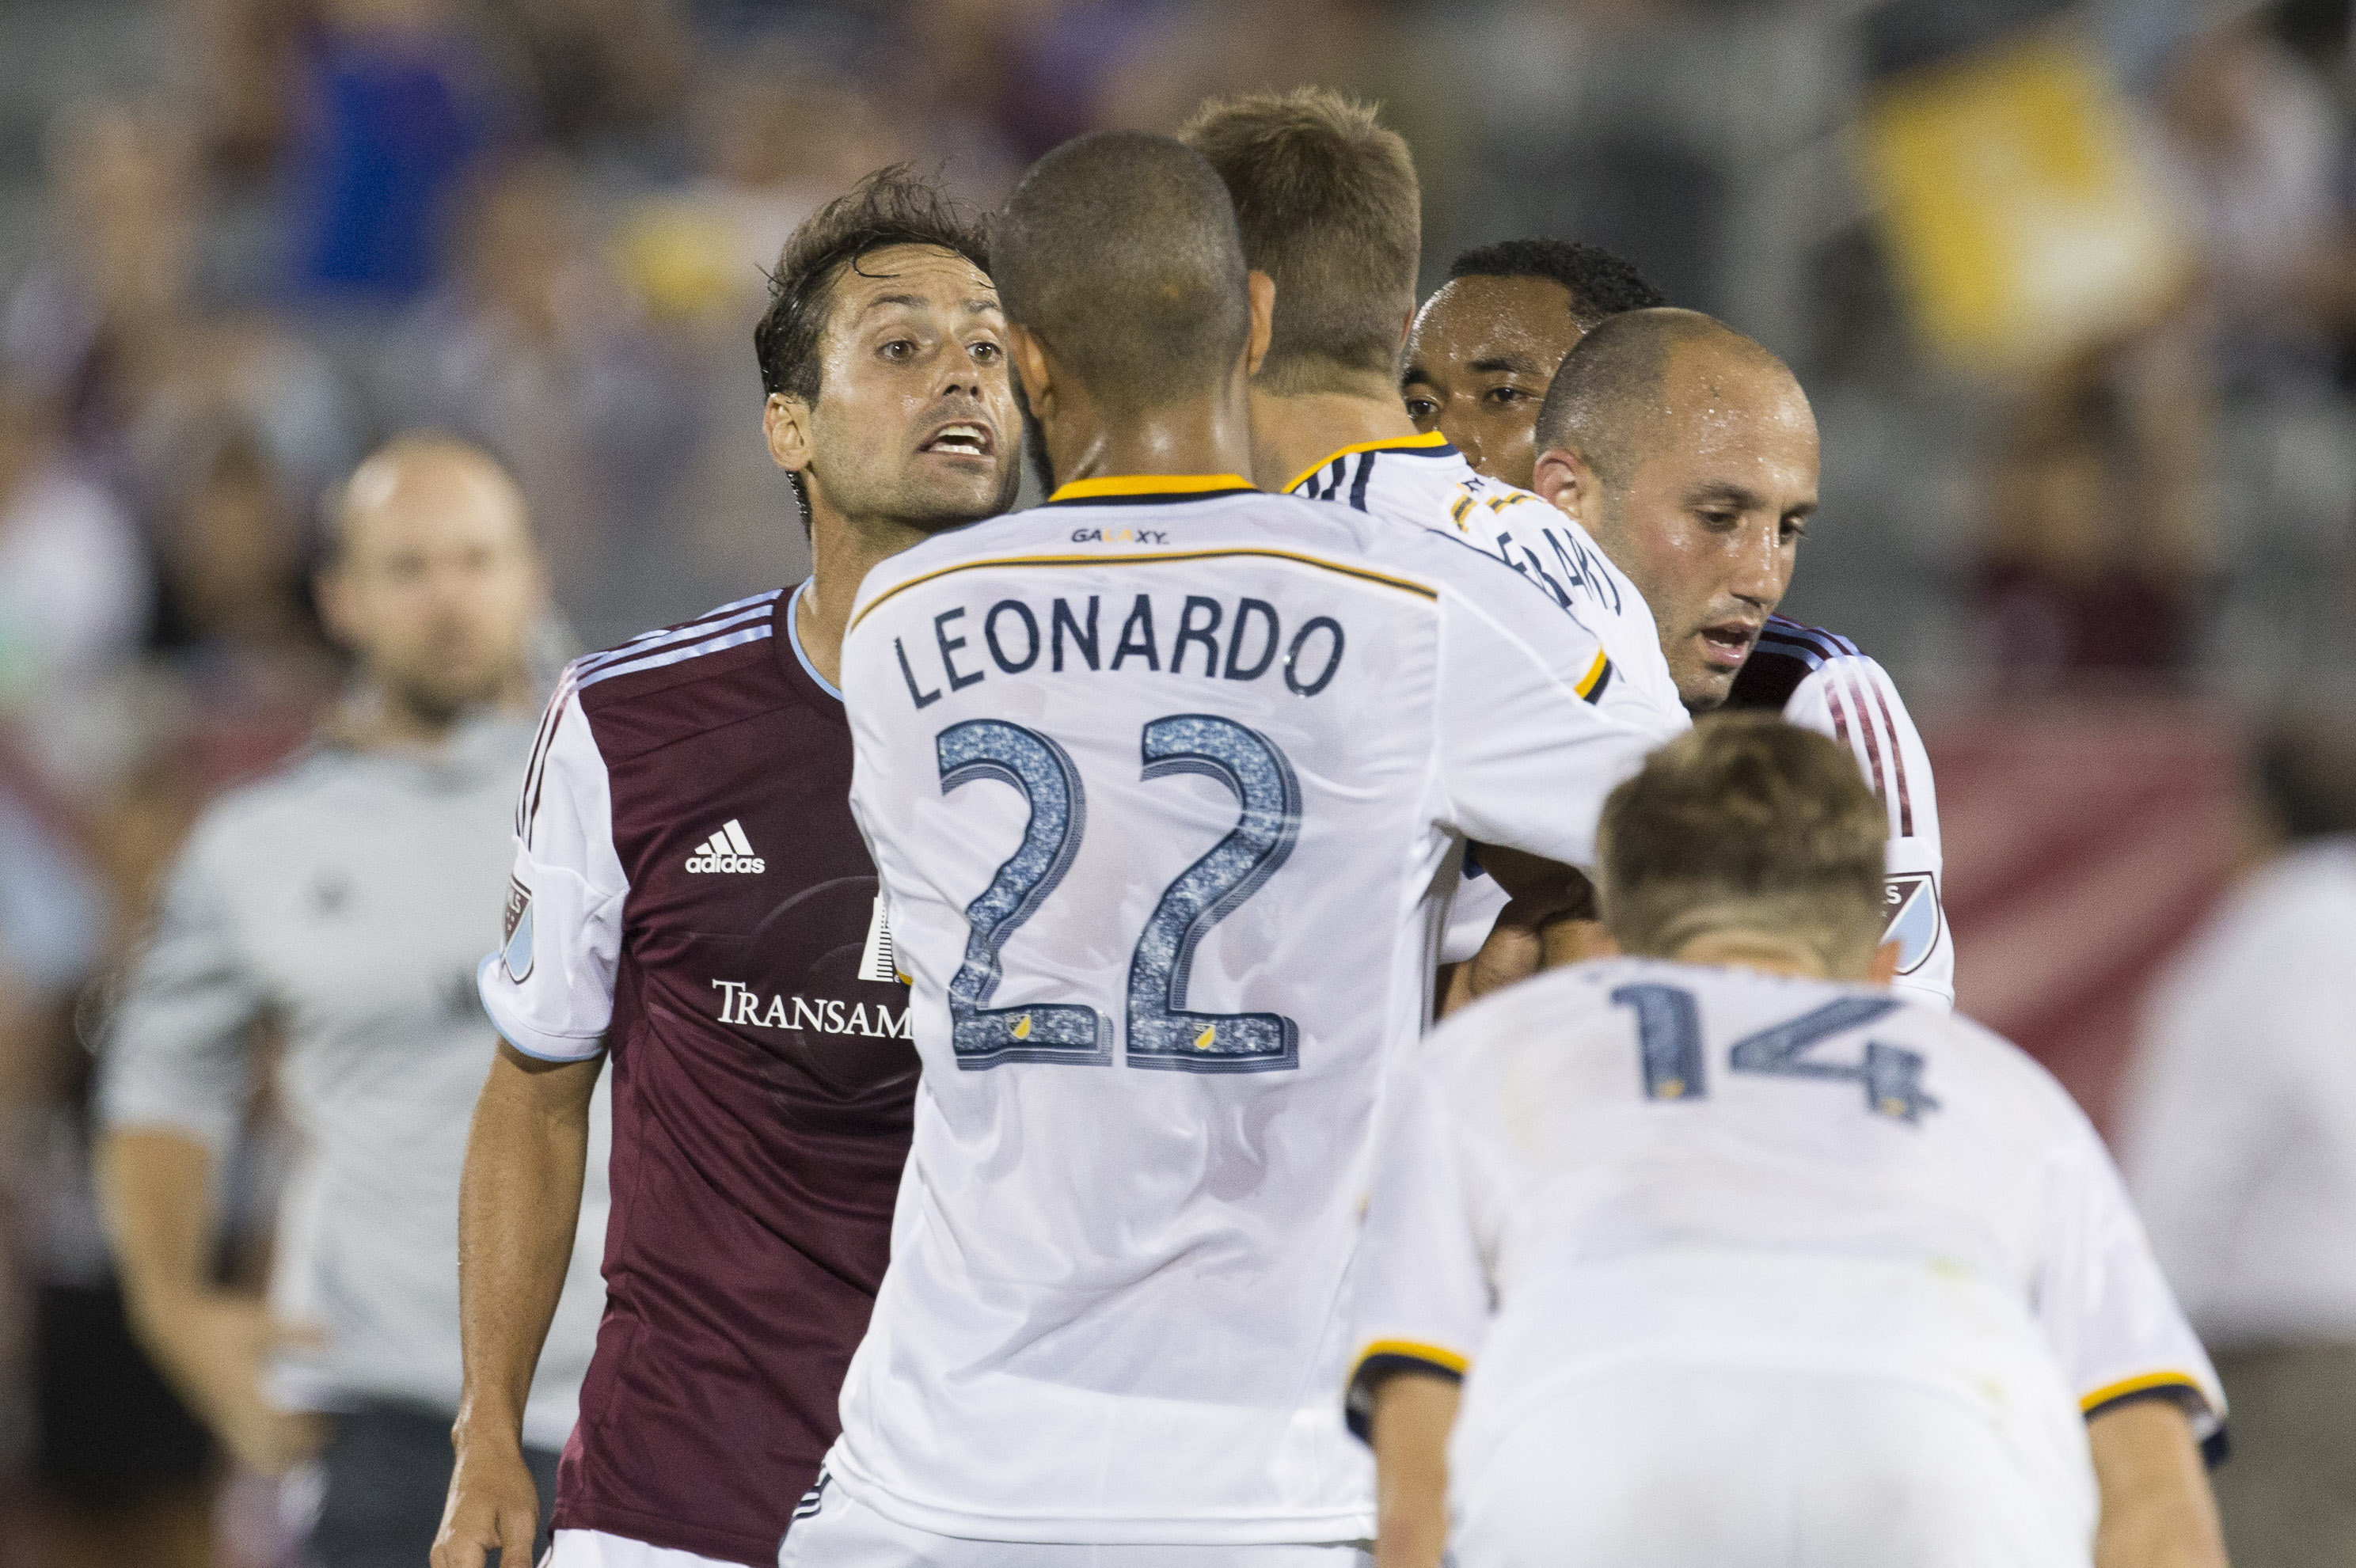 Marcelo Sarvas of the Rapids with a few words for Steven Gerrard after Gerrard kicked the ball into Juan Ramiez's face late in the match.